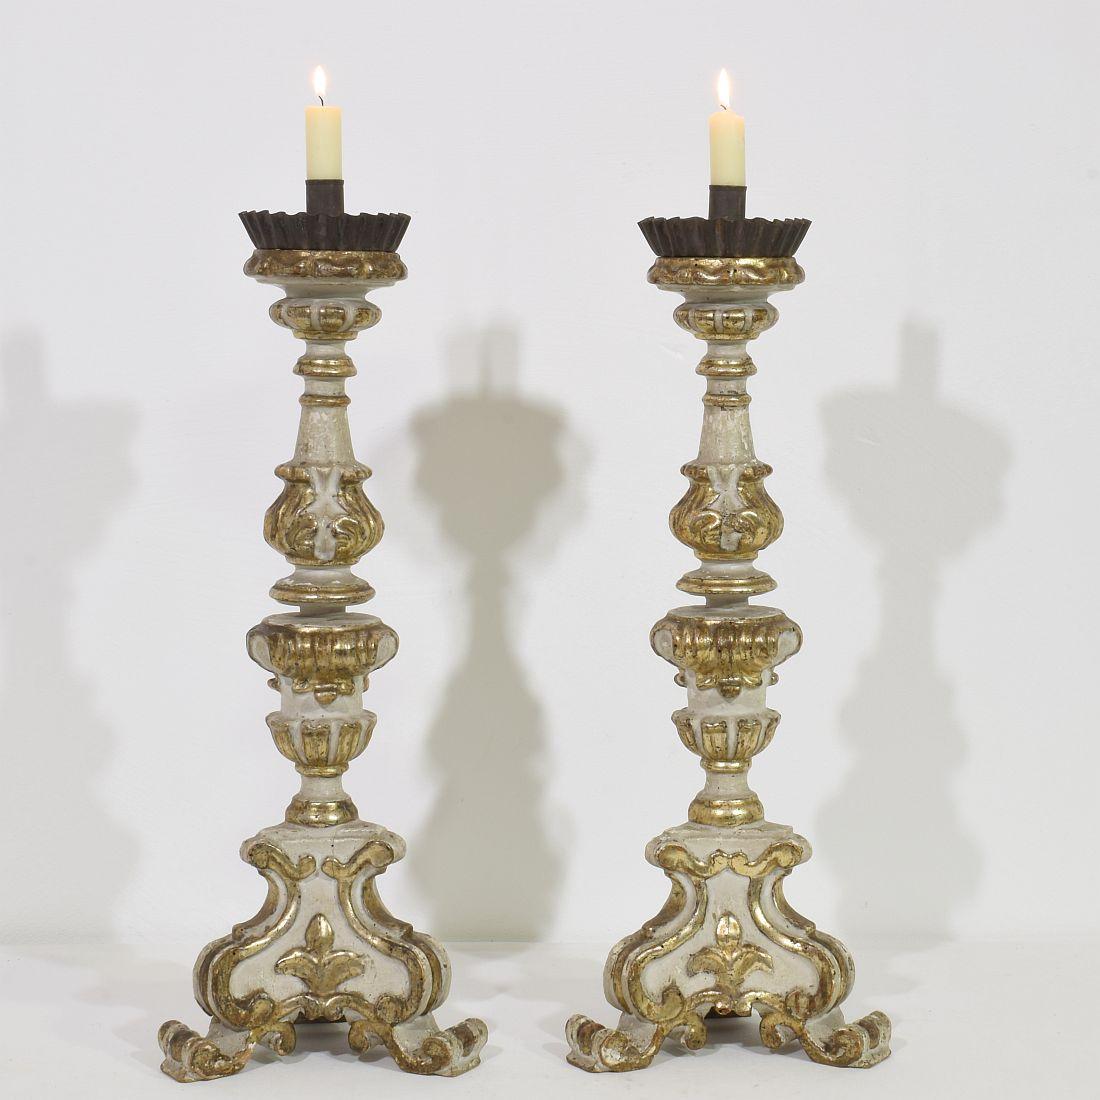 Gorgeous pair of Baroque carved wooden candleholders. Italy, circa 1750-1780. Weathered, repairs and small losses.
More pictures available on request. Measurement individual.